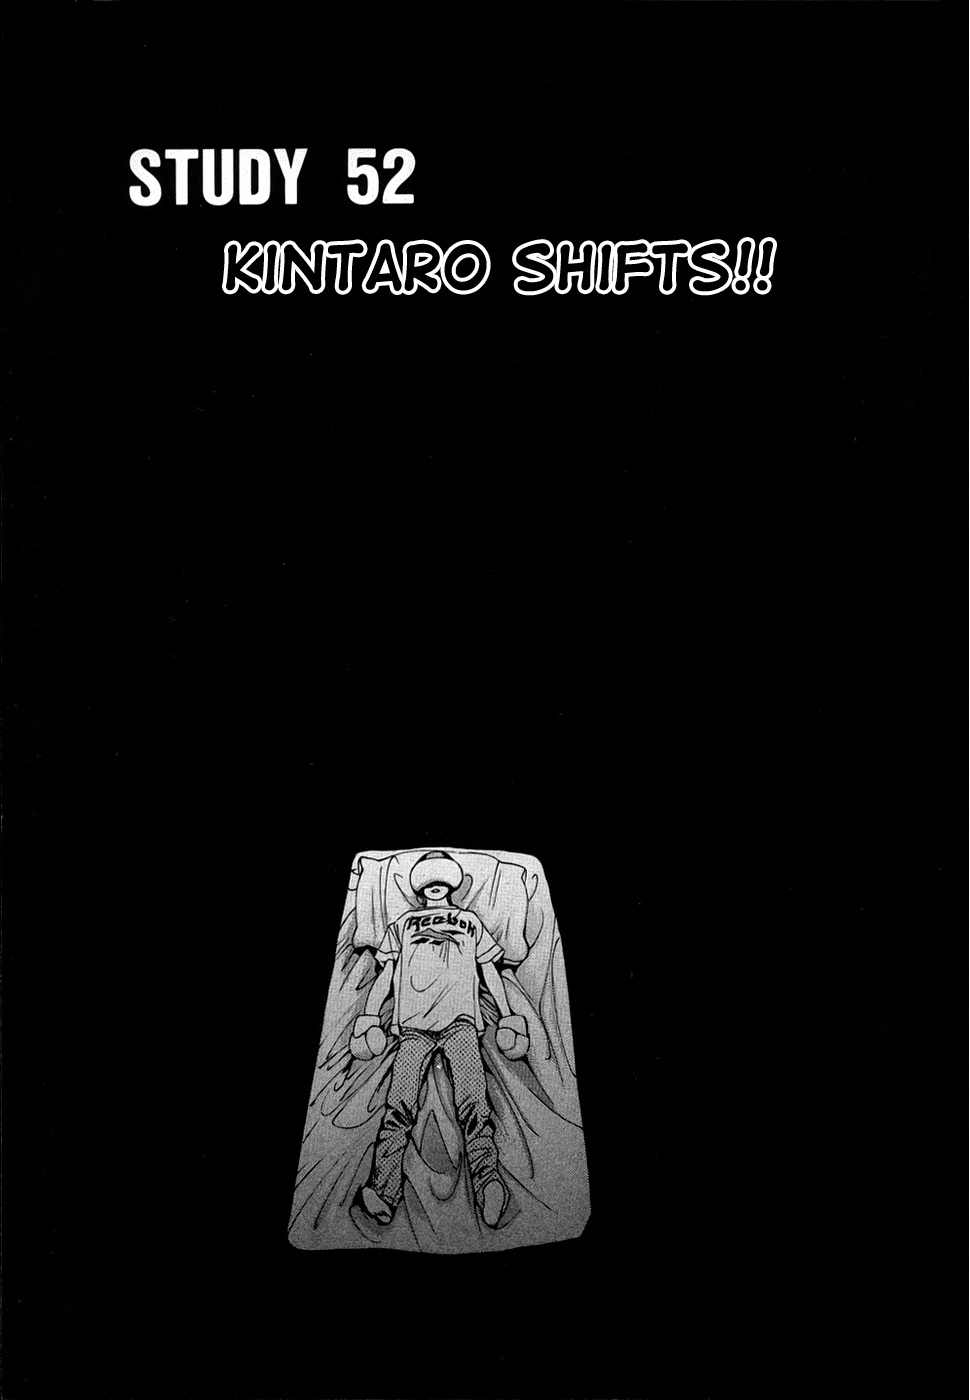 Golden Boy Vol.7 Chapter 52: Kintaro Shifts!! - Picture 1